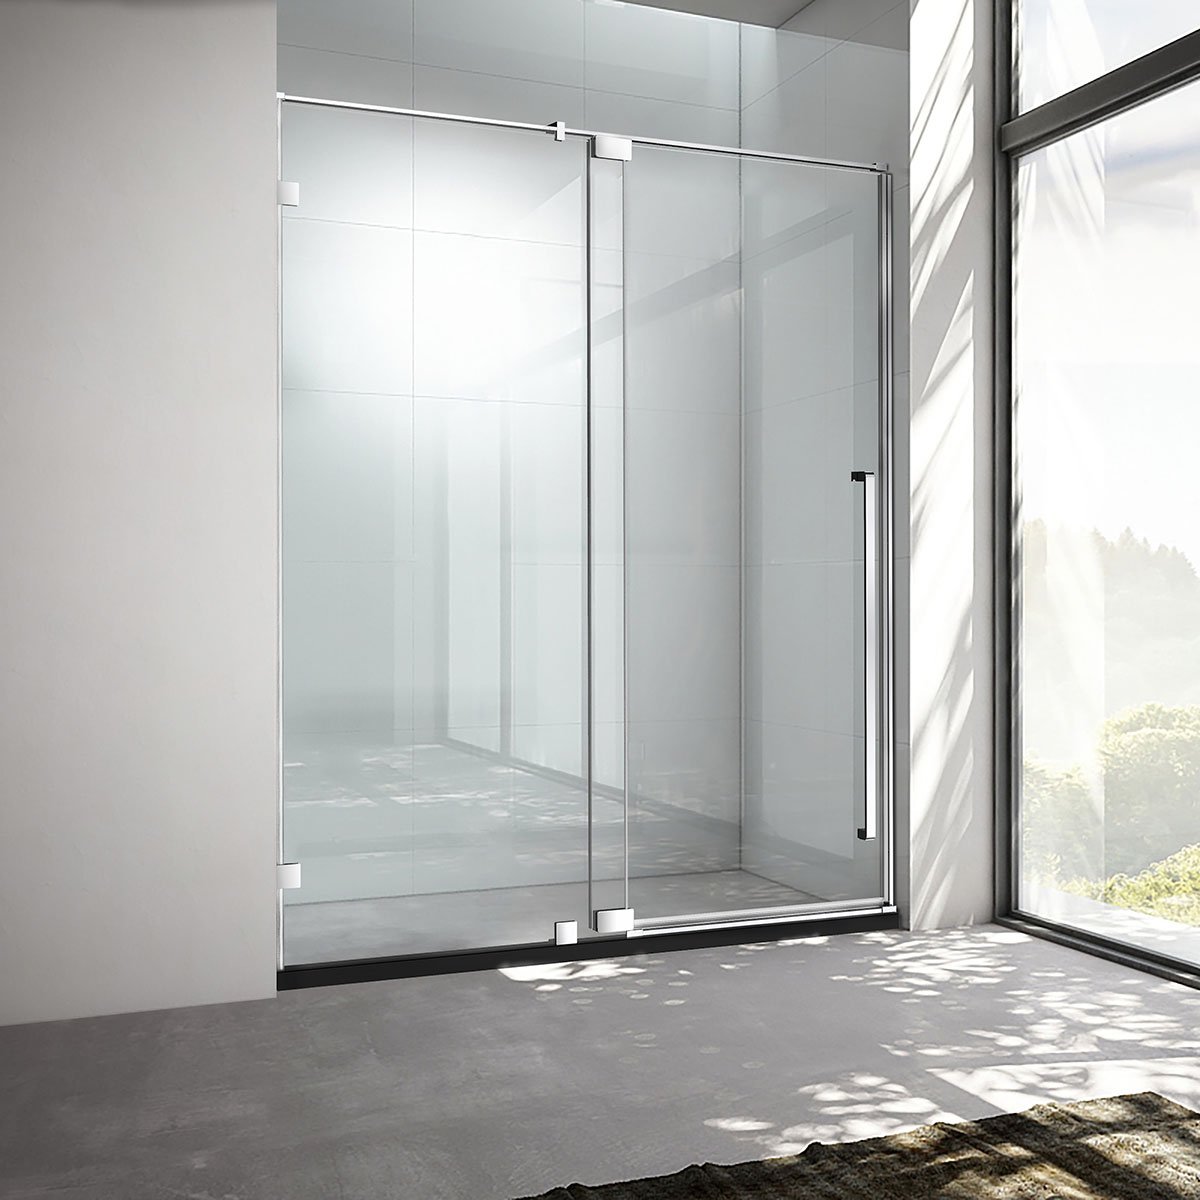 54" AH01 Series Frameless Swing Shower Door with Klearteck Treatment (Fixed 3/8" & Swing 5/16" Thickness) (Brushed Nickel)